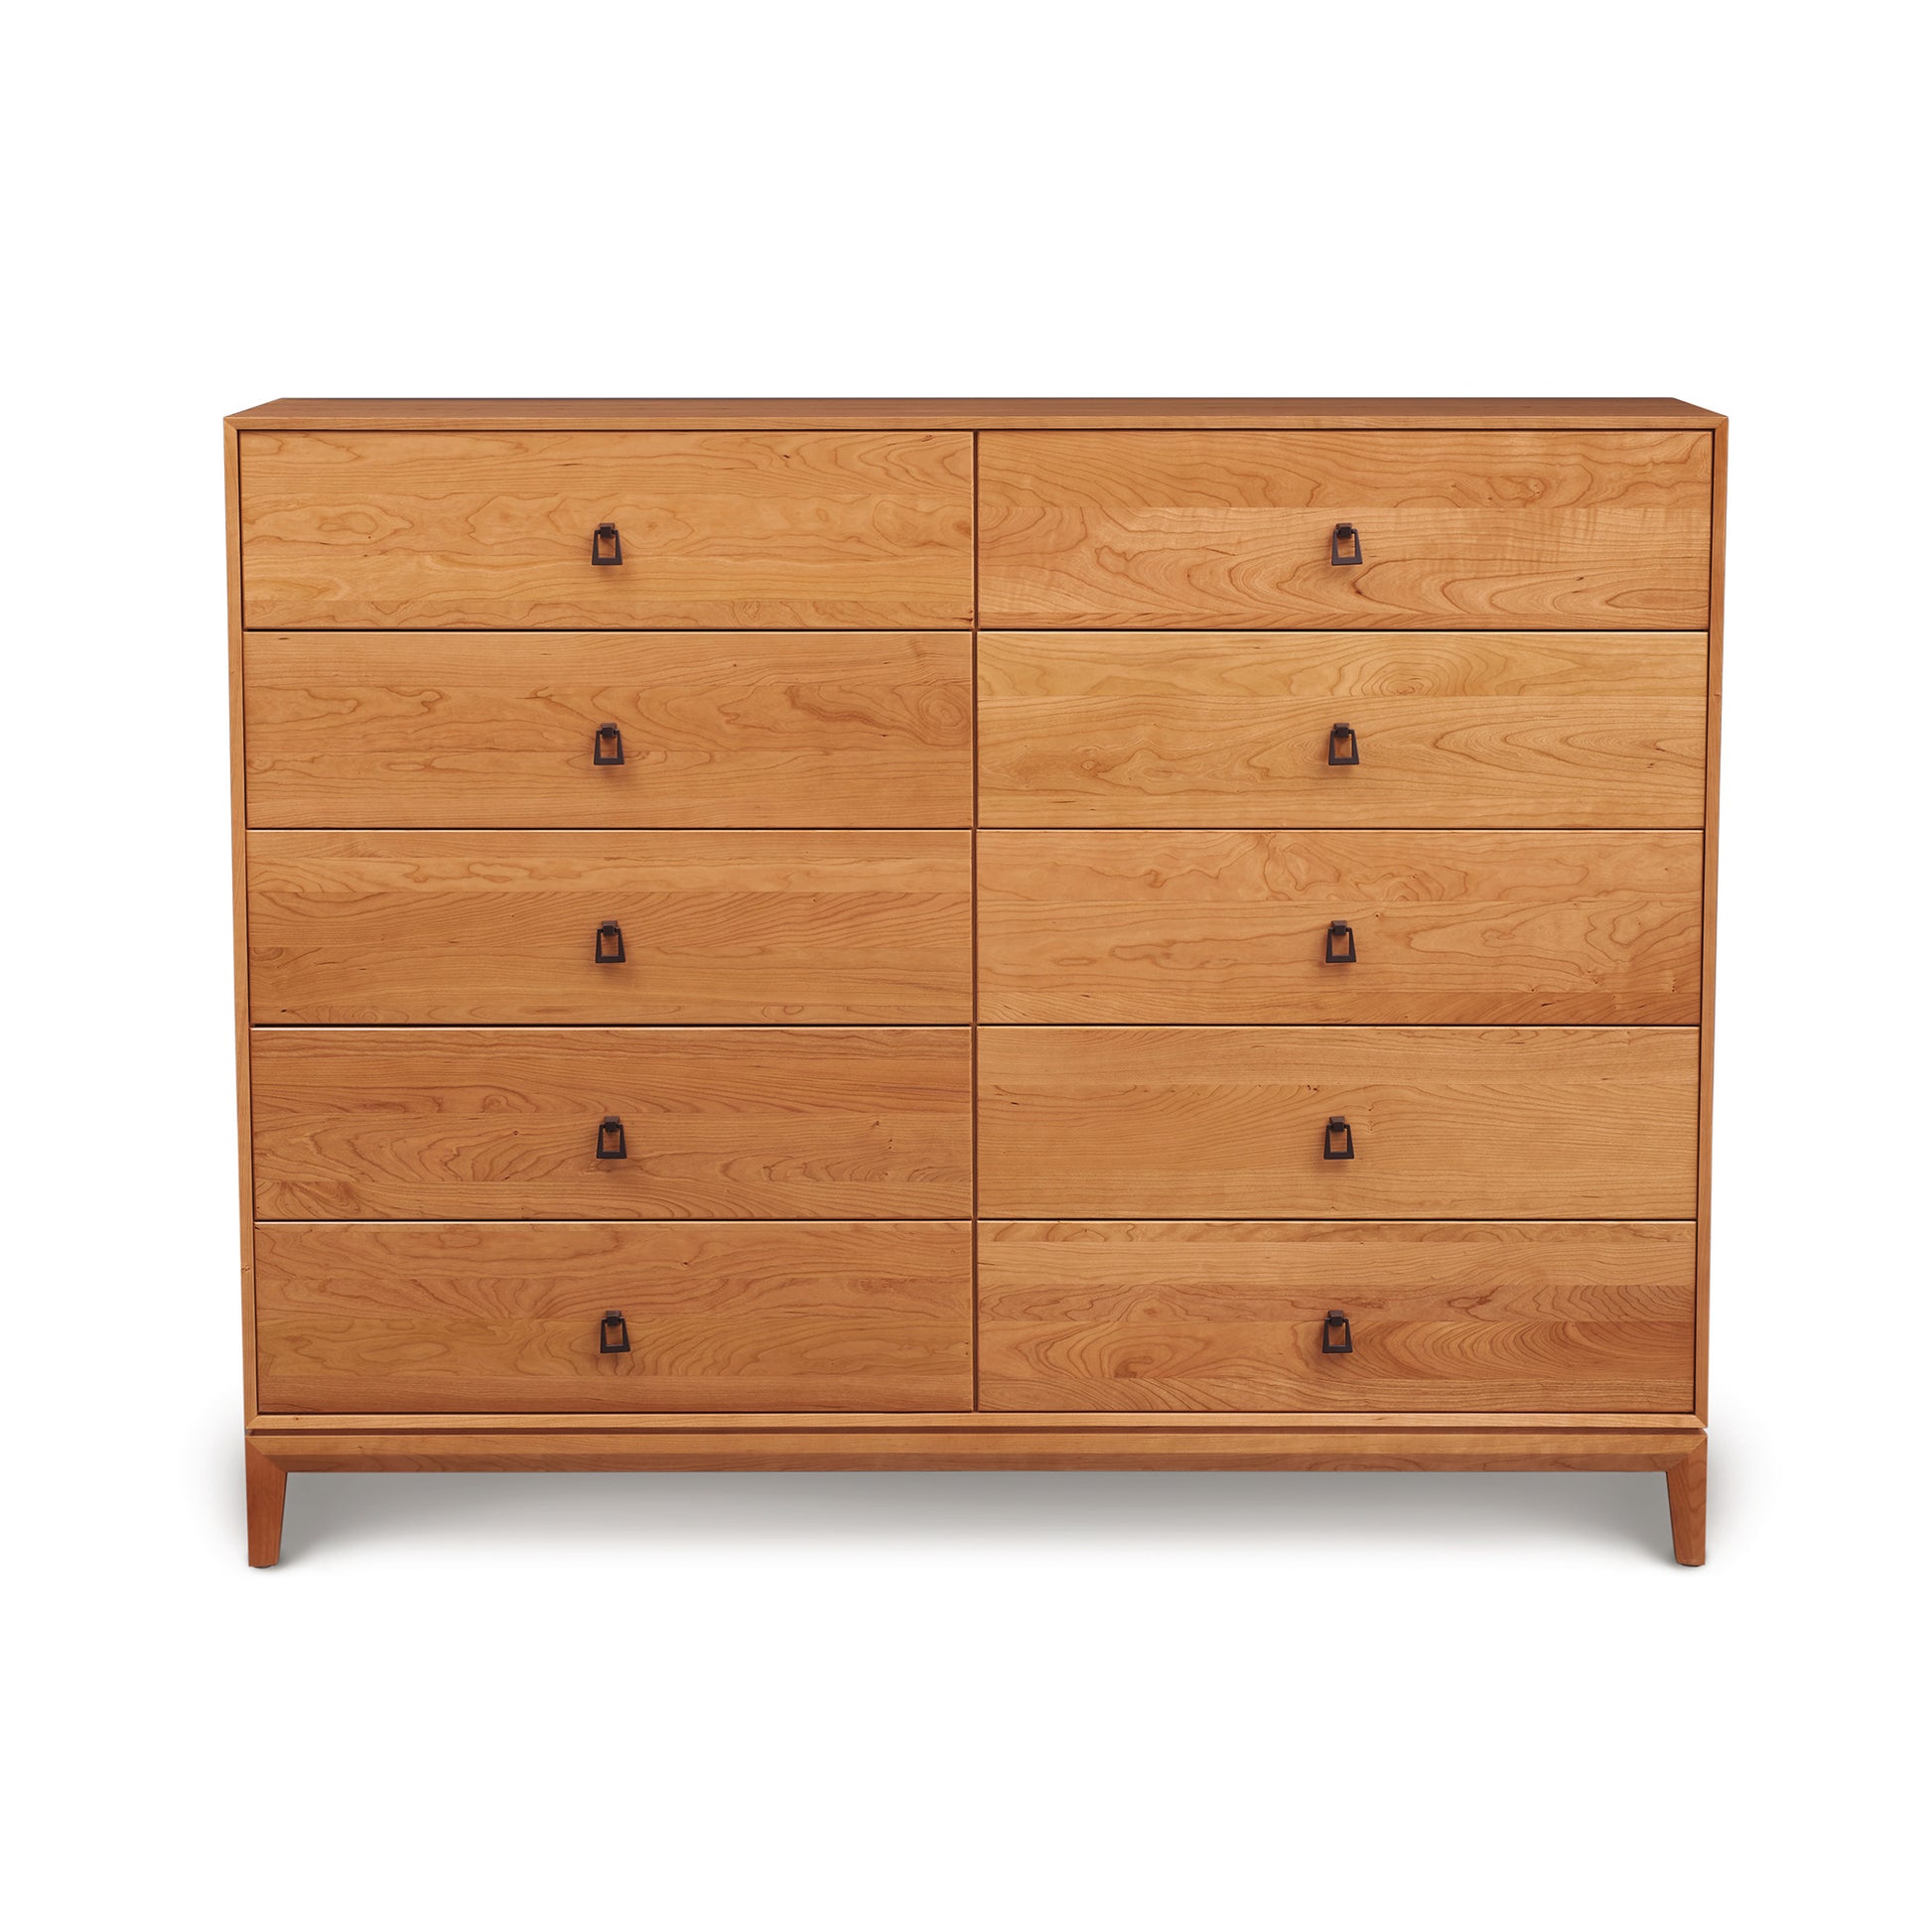 A Mansfield Cherry 10-Drawer Dresser from Copeland Furniture, featuring six evenly spaced drawers with square handles, displayed against a plain white background. The dresser has a clean, contemporary design with a light natural finish.